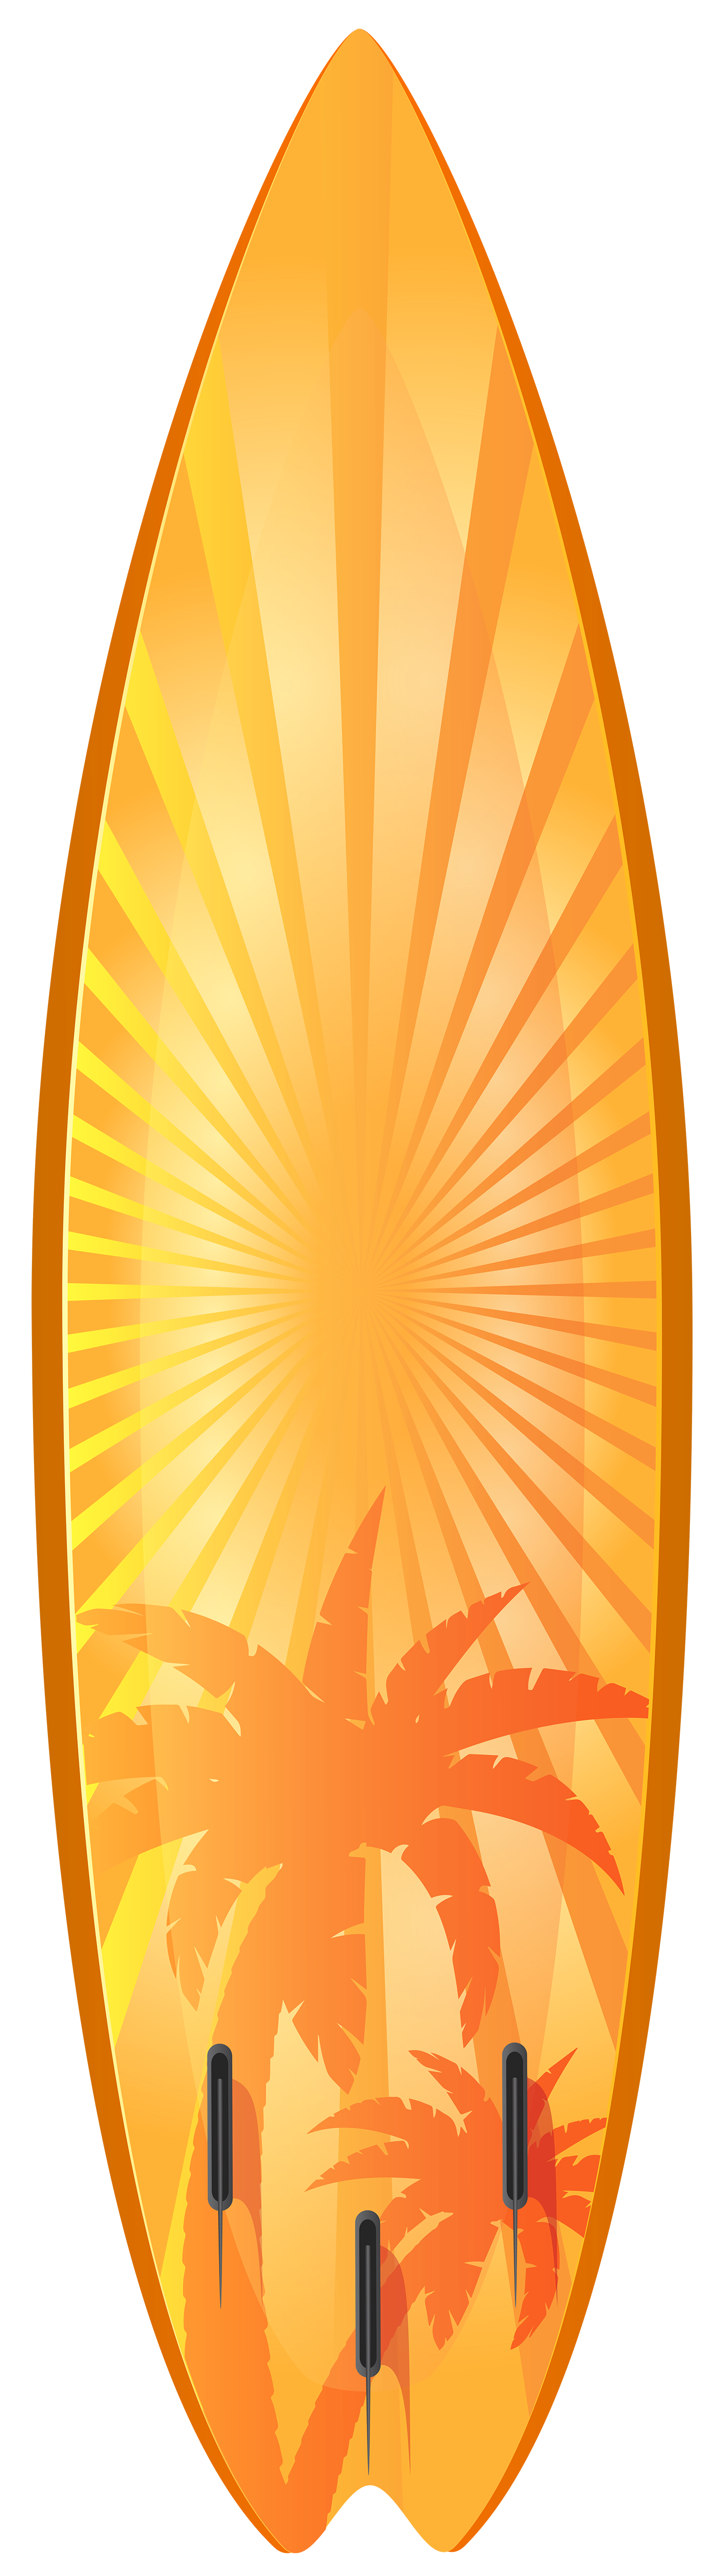 Free Surfboard Clipart, Download Free Clip Art, Free Clip